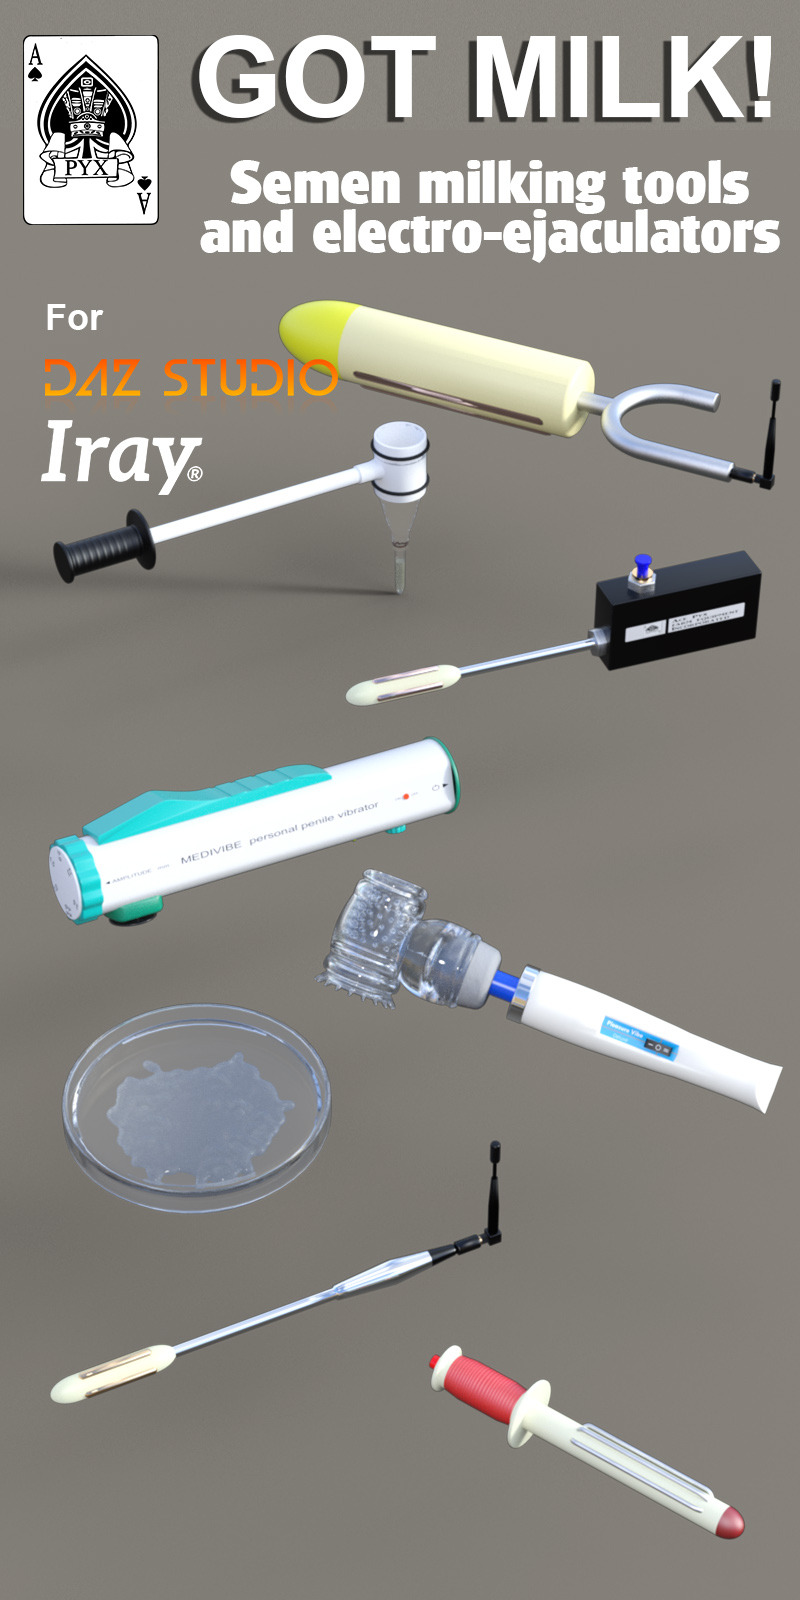  A set of Iray textured  machines and devices to collect semen from your  males